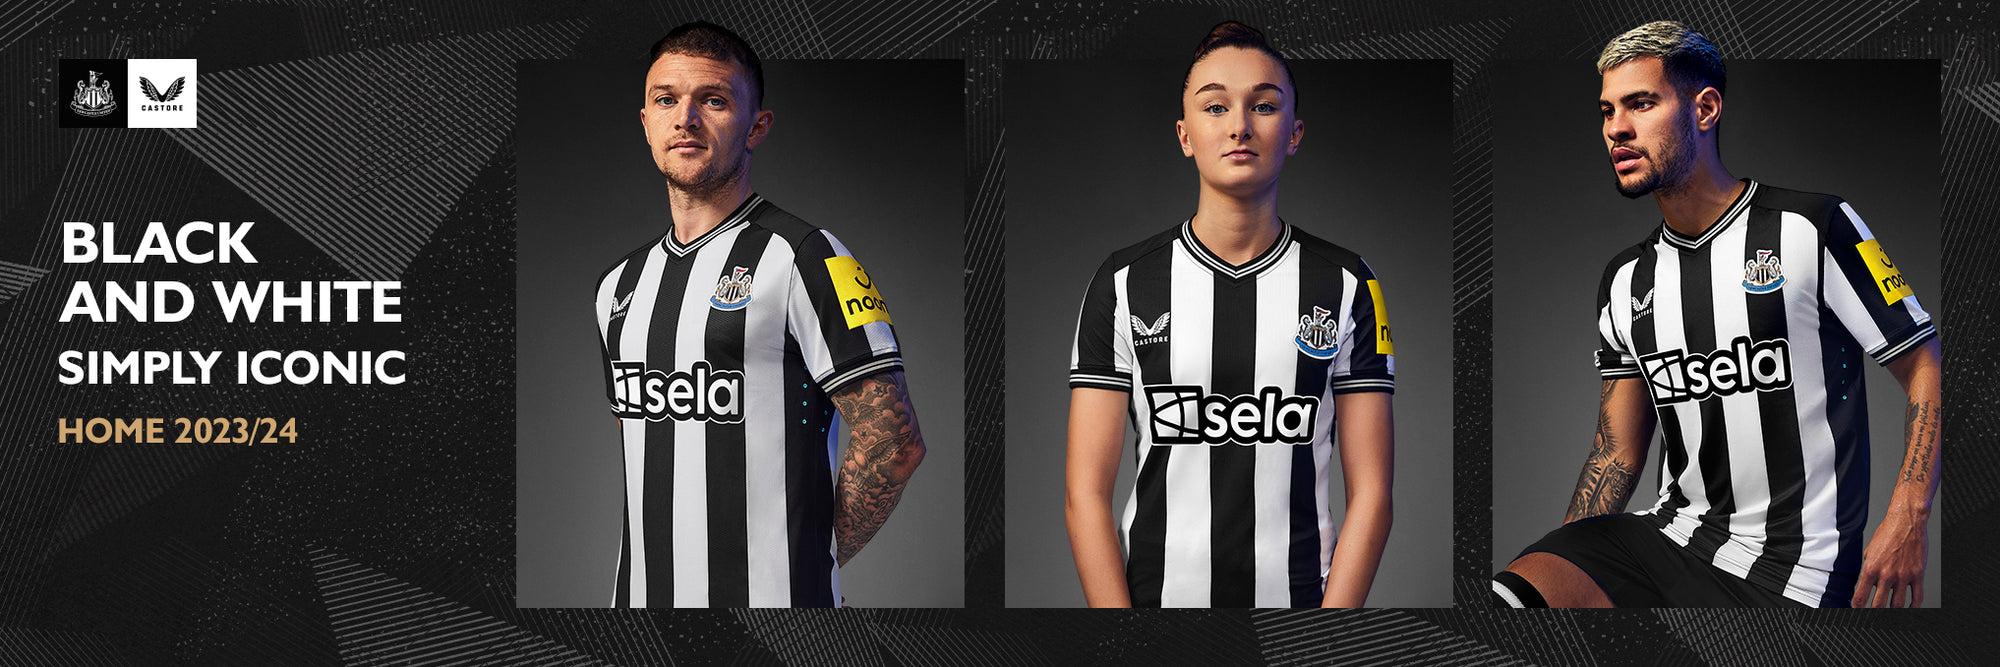 23 24 Home Kit Launch